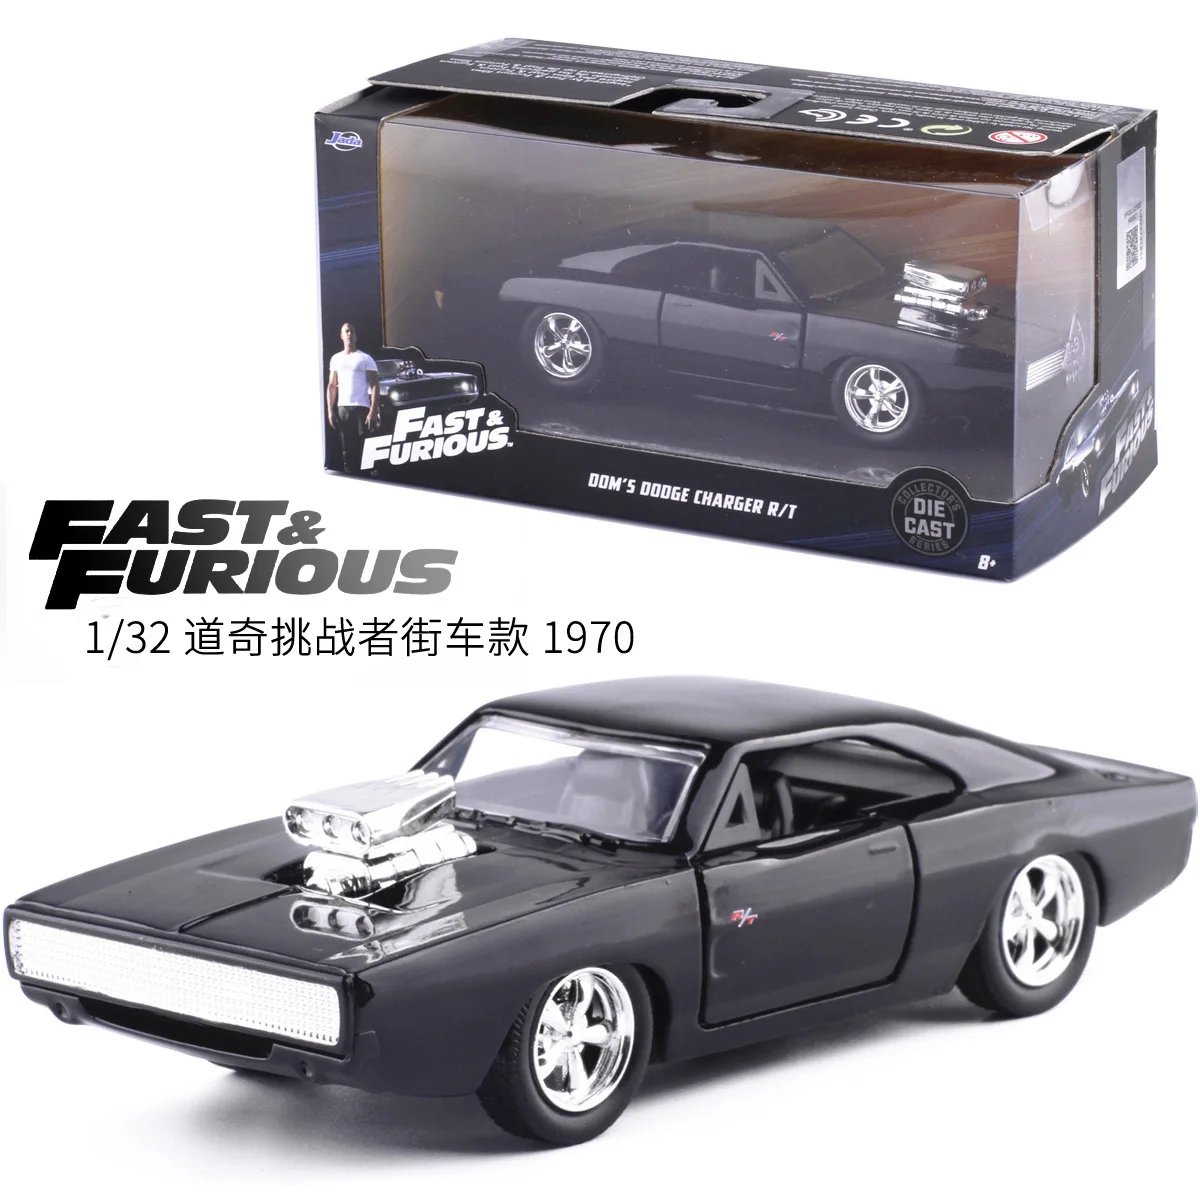 24 Scale Jada Toys Fast /& Furious Dom/'s Dodge Charger Daytona DIE-CAST Car 1